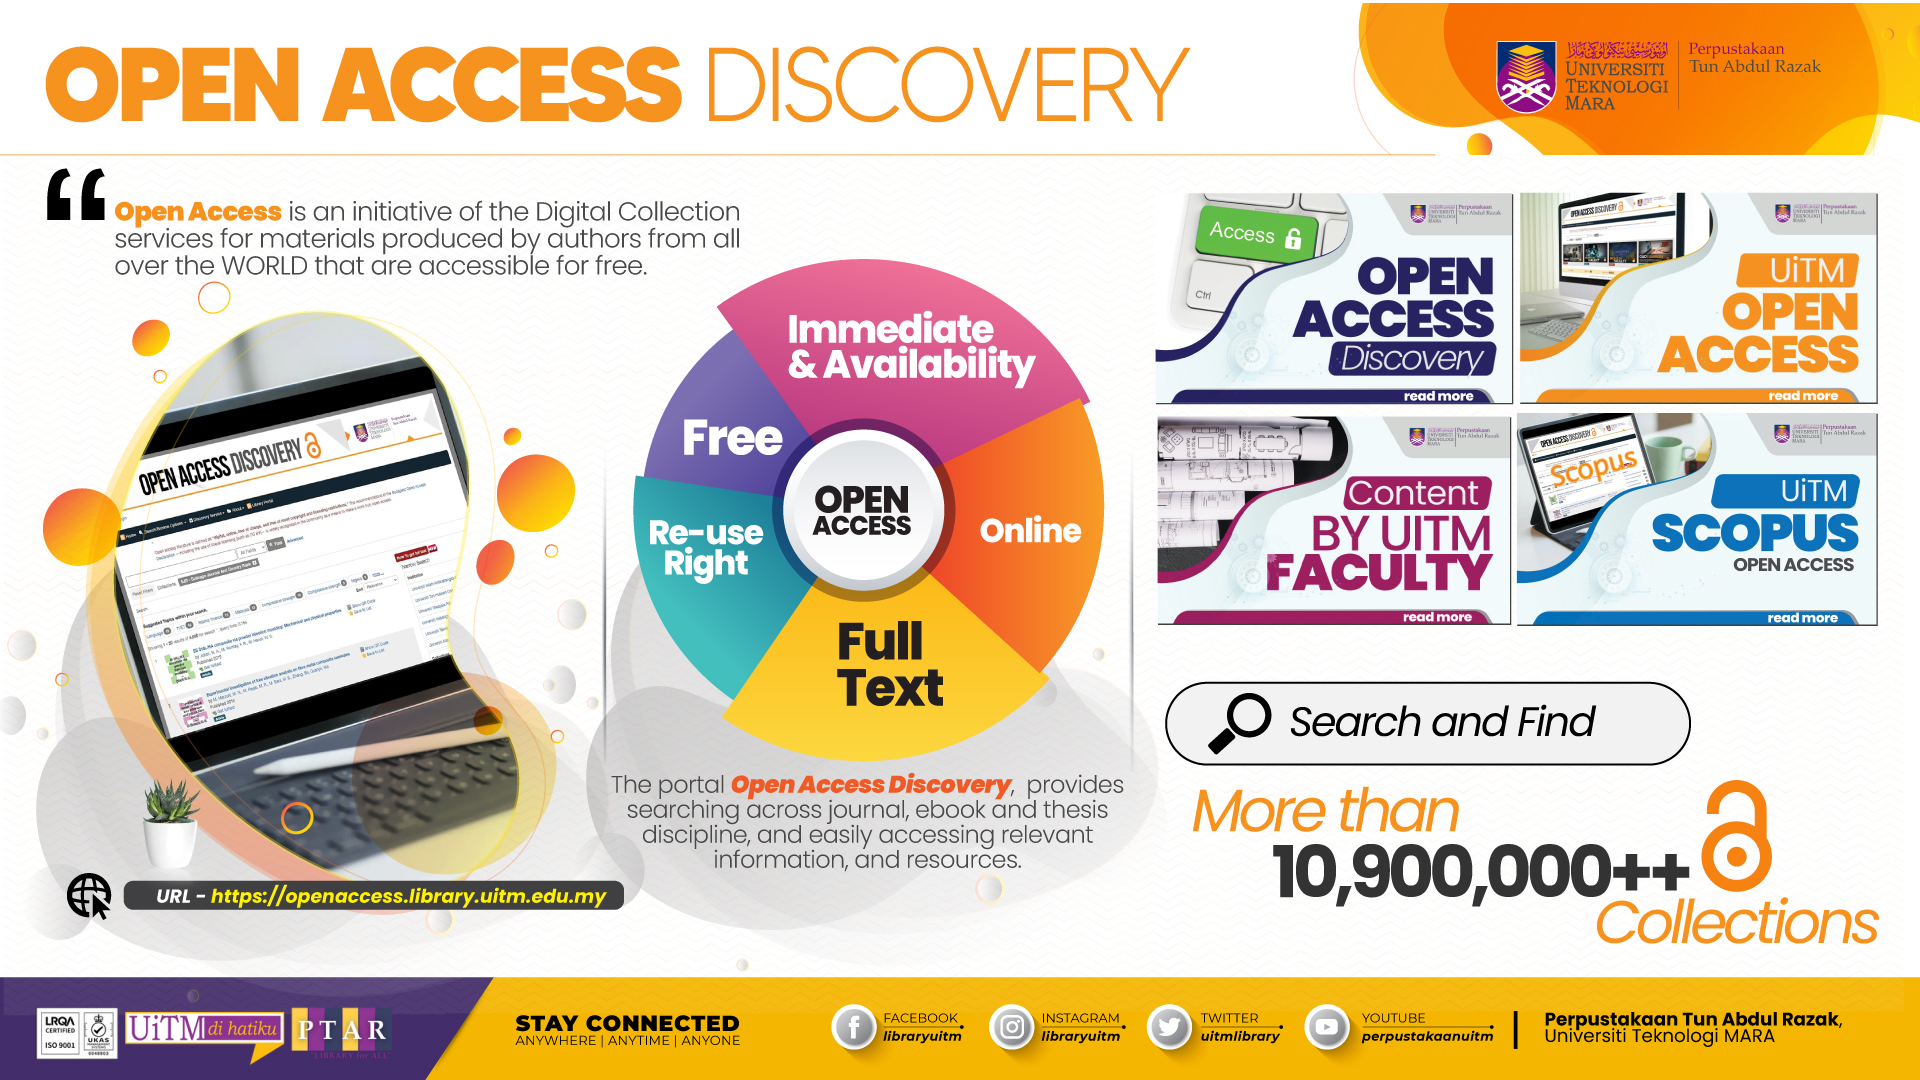 Open Access Discovery - UiTM Melaka Library